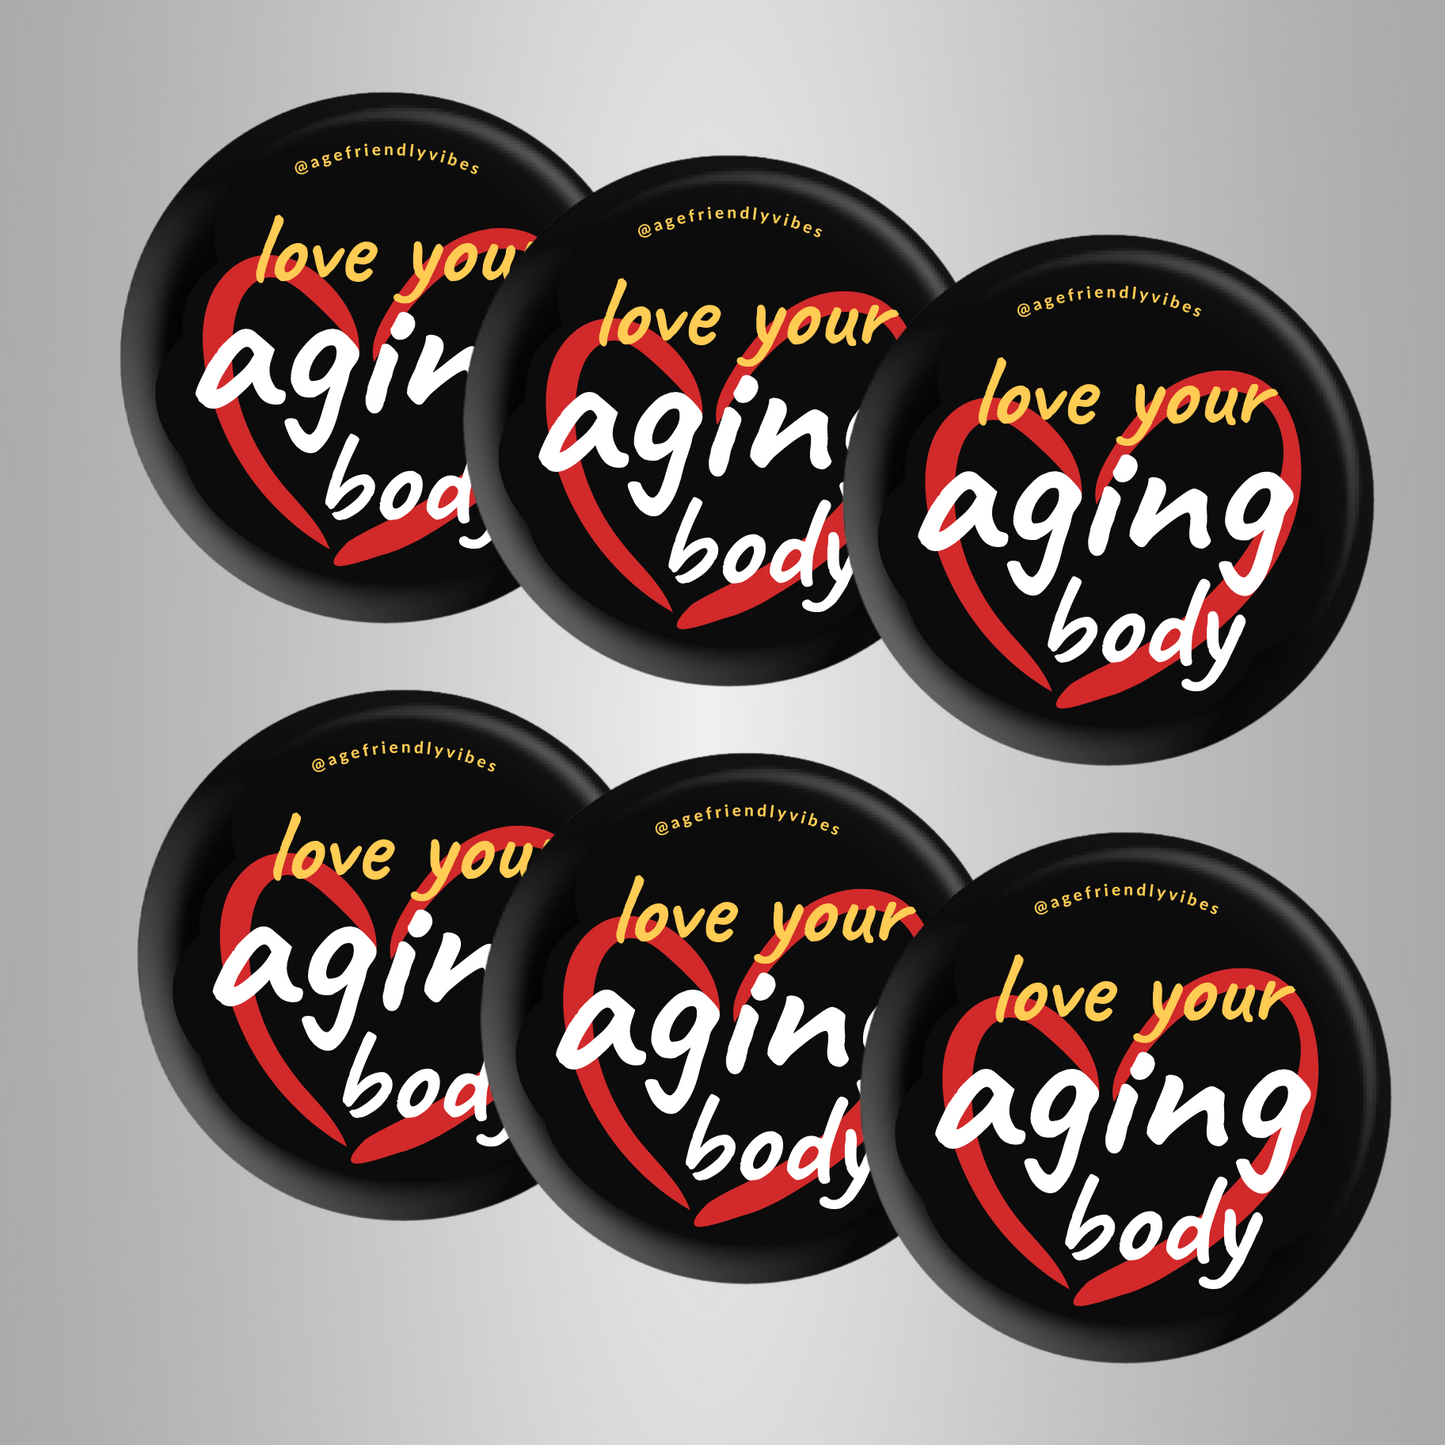 Love Your Aging Body, Age-Positive Pin-Back Button